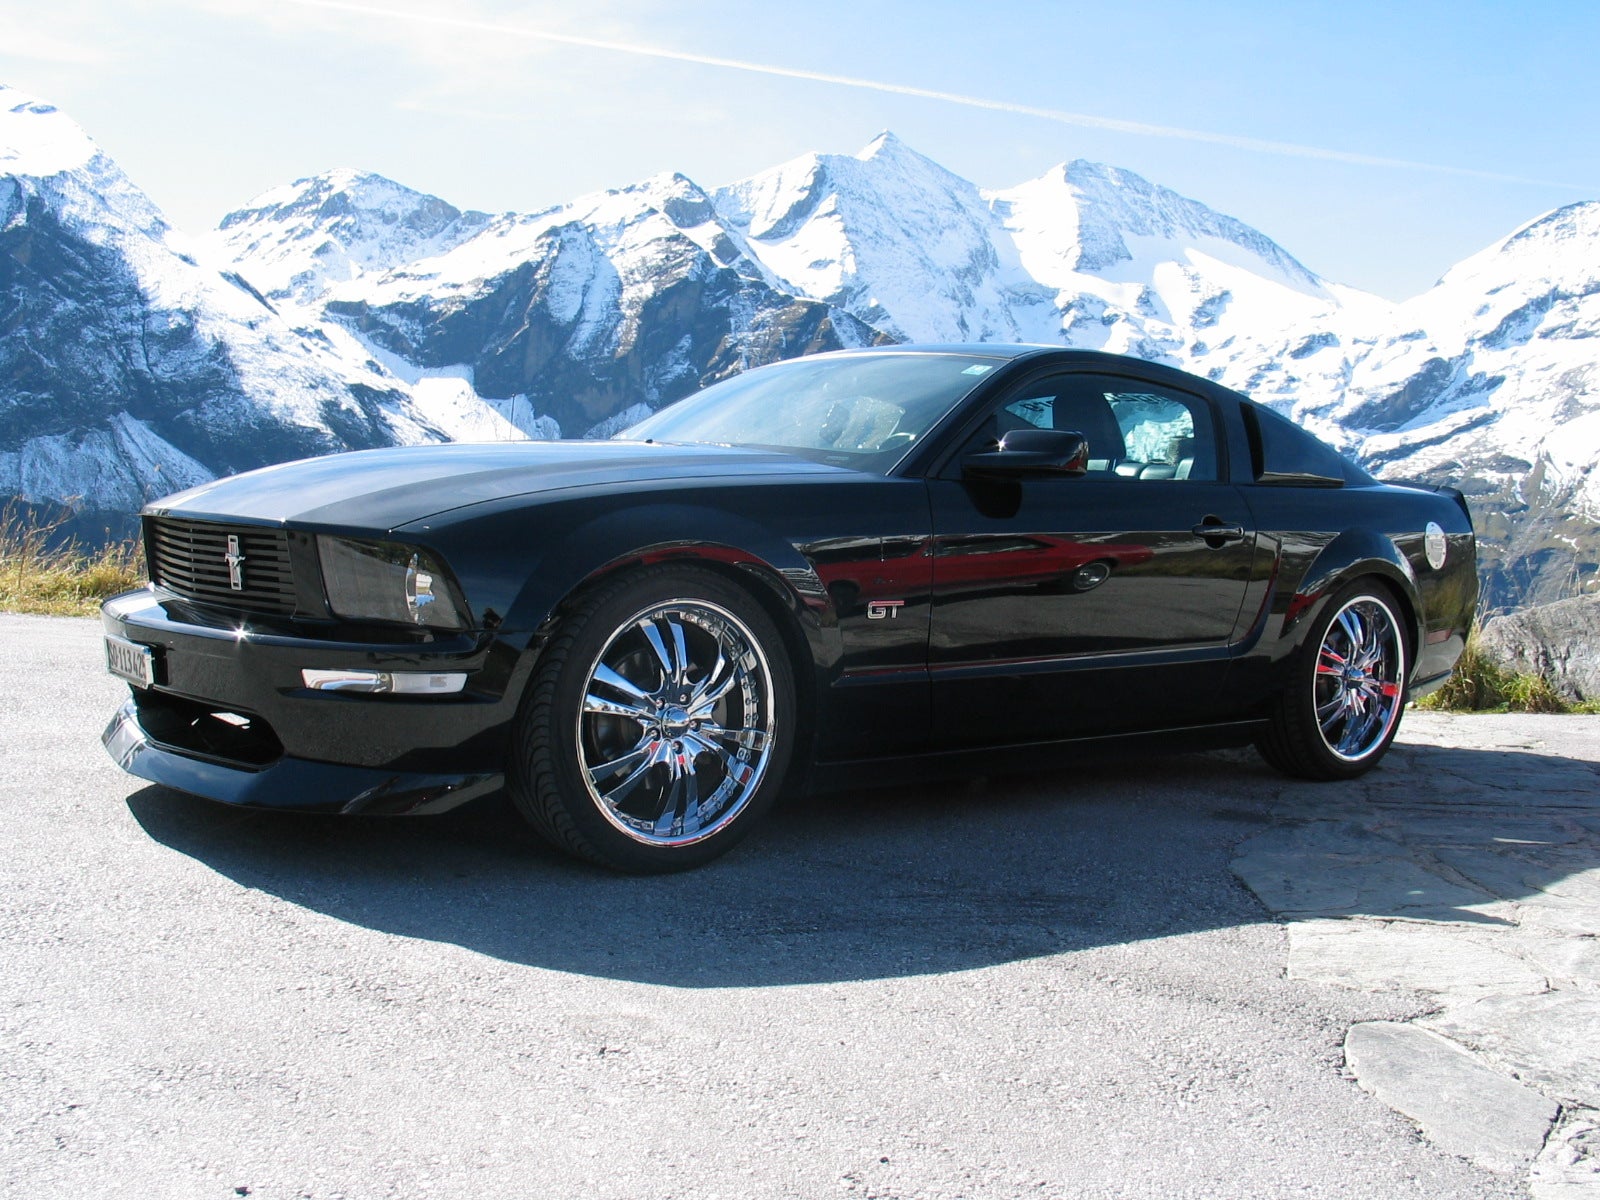 2005 Ford mustang gt msrp #1